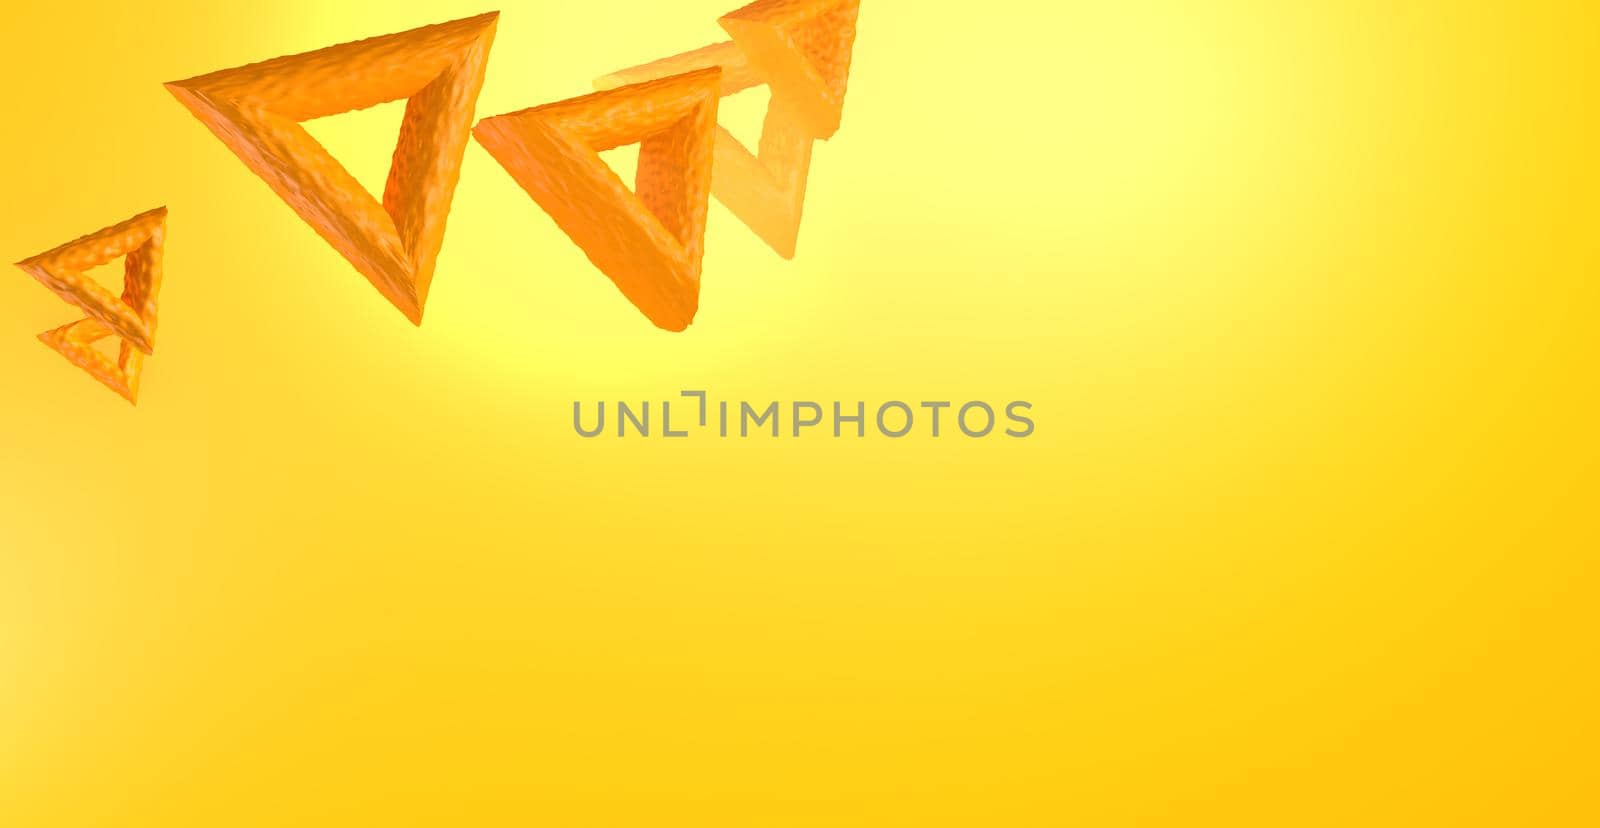 Abstract orange background with dynamic 3d triangles. orange and yellow shapes on an orange background. Modern trendy banner or poster design 3D image, copy space.